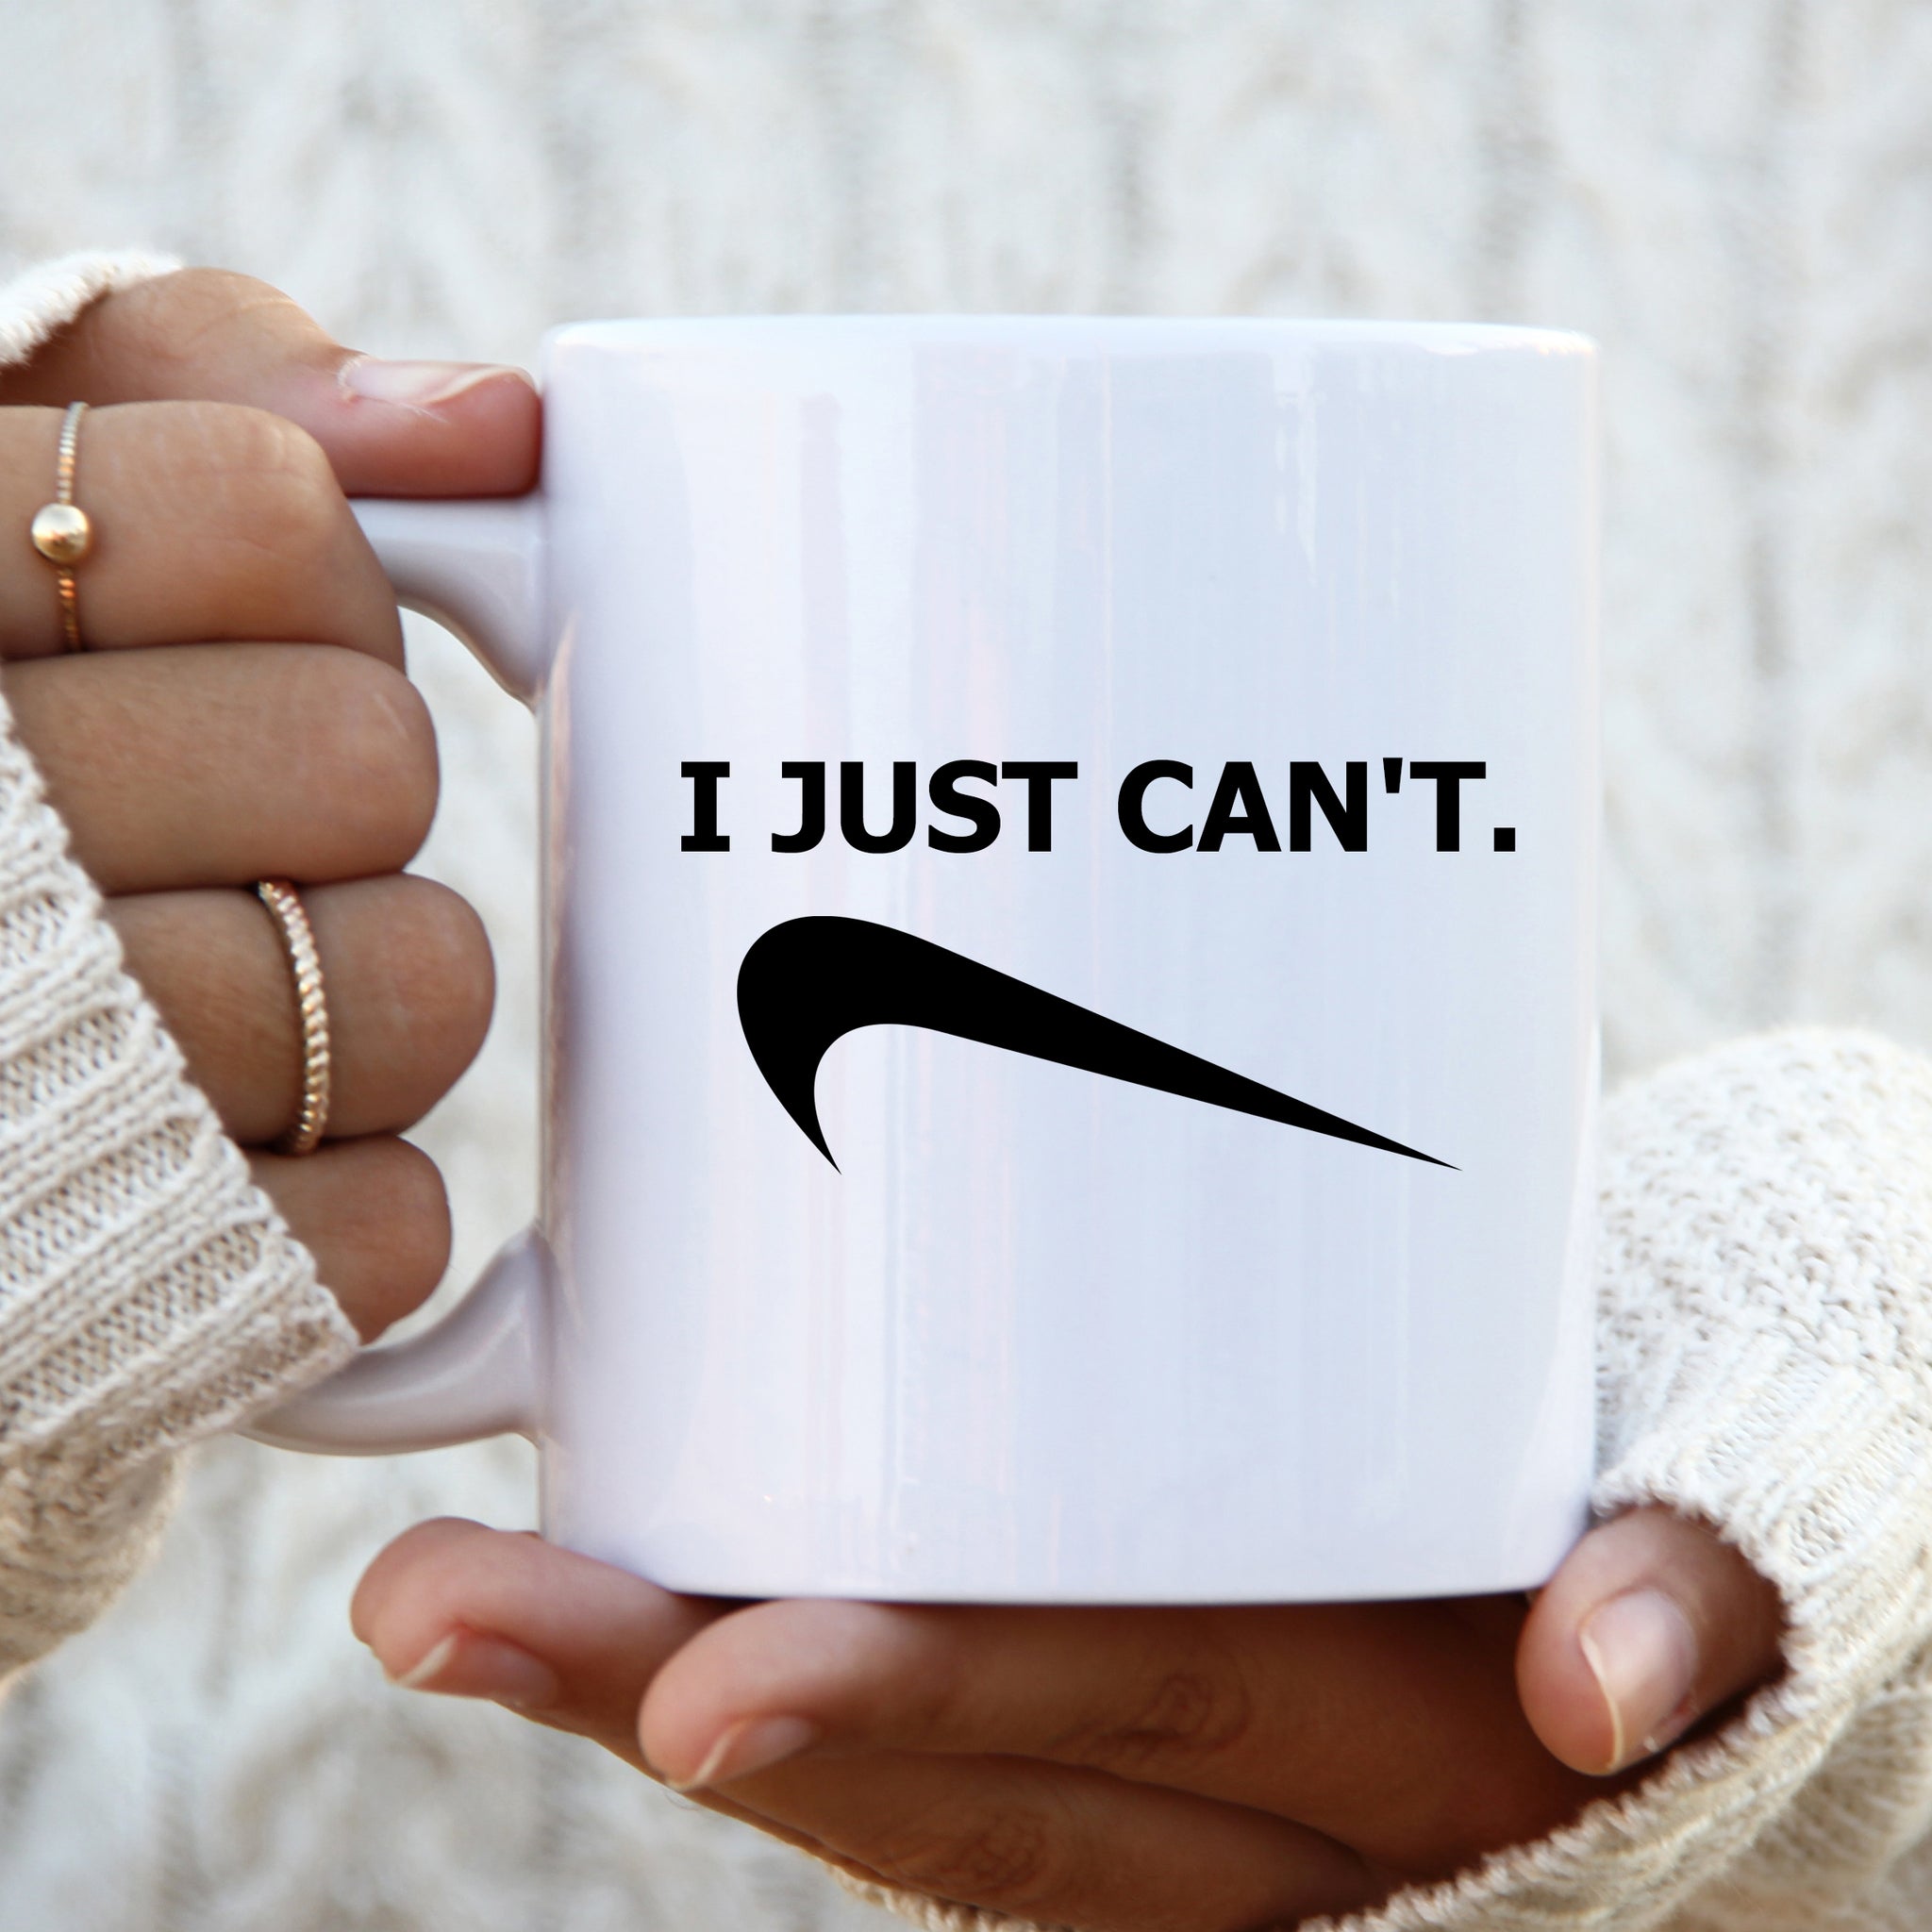 Funny Mug, I Just Can't, Funny Work Leavers, Christmas, Colleague, Friend, Happy Birthday Gift for Men or Women